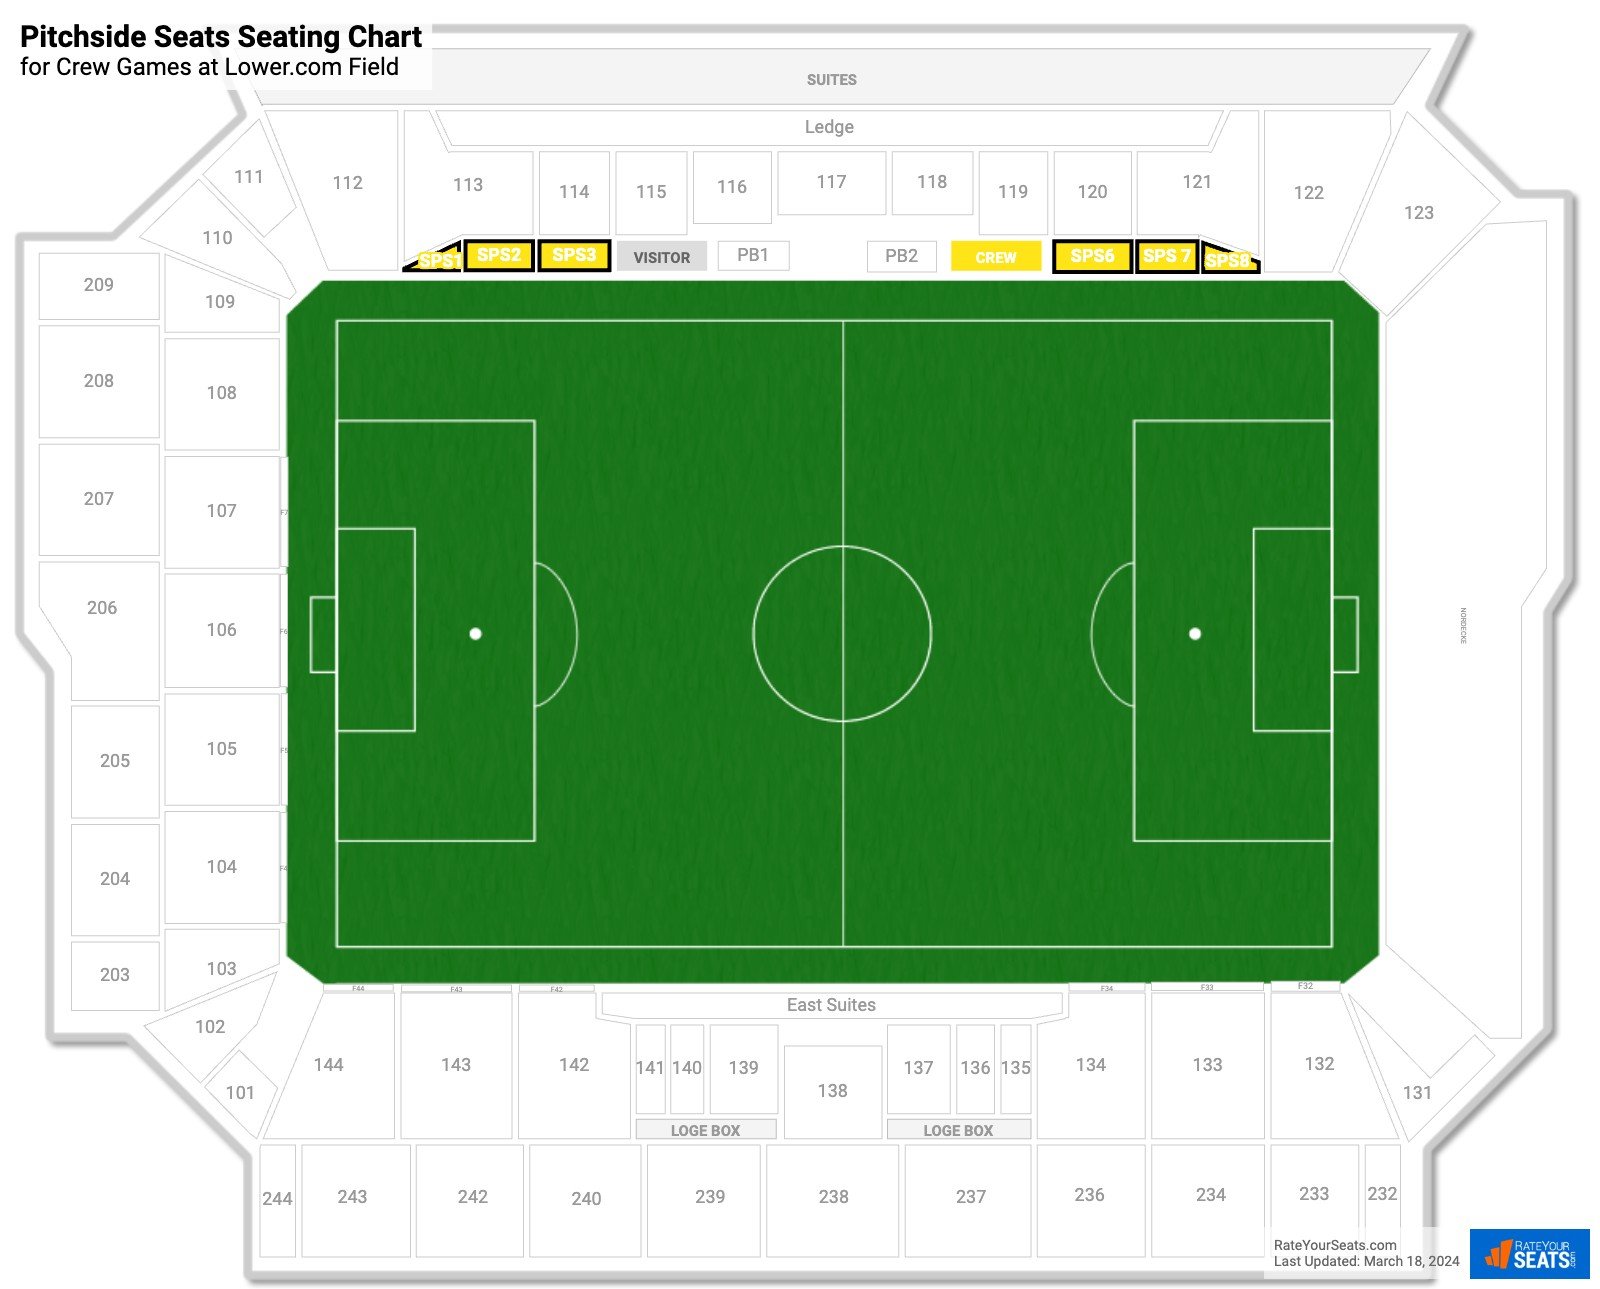 Crew Pitchside Seats Seating Chart at Lower.com Field